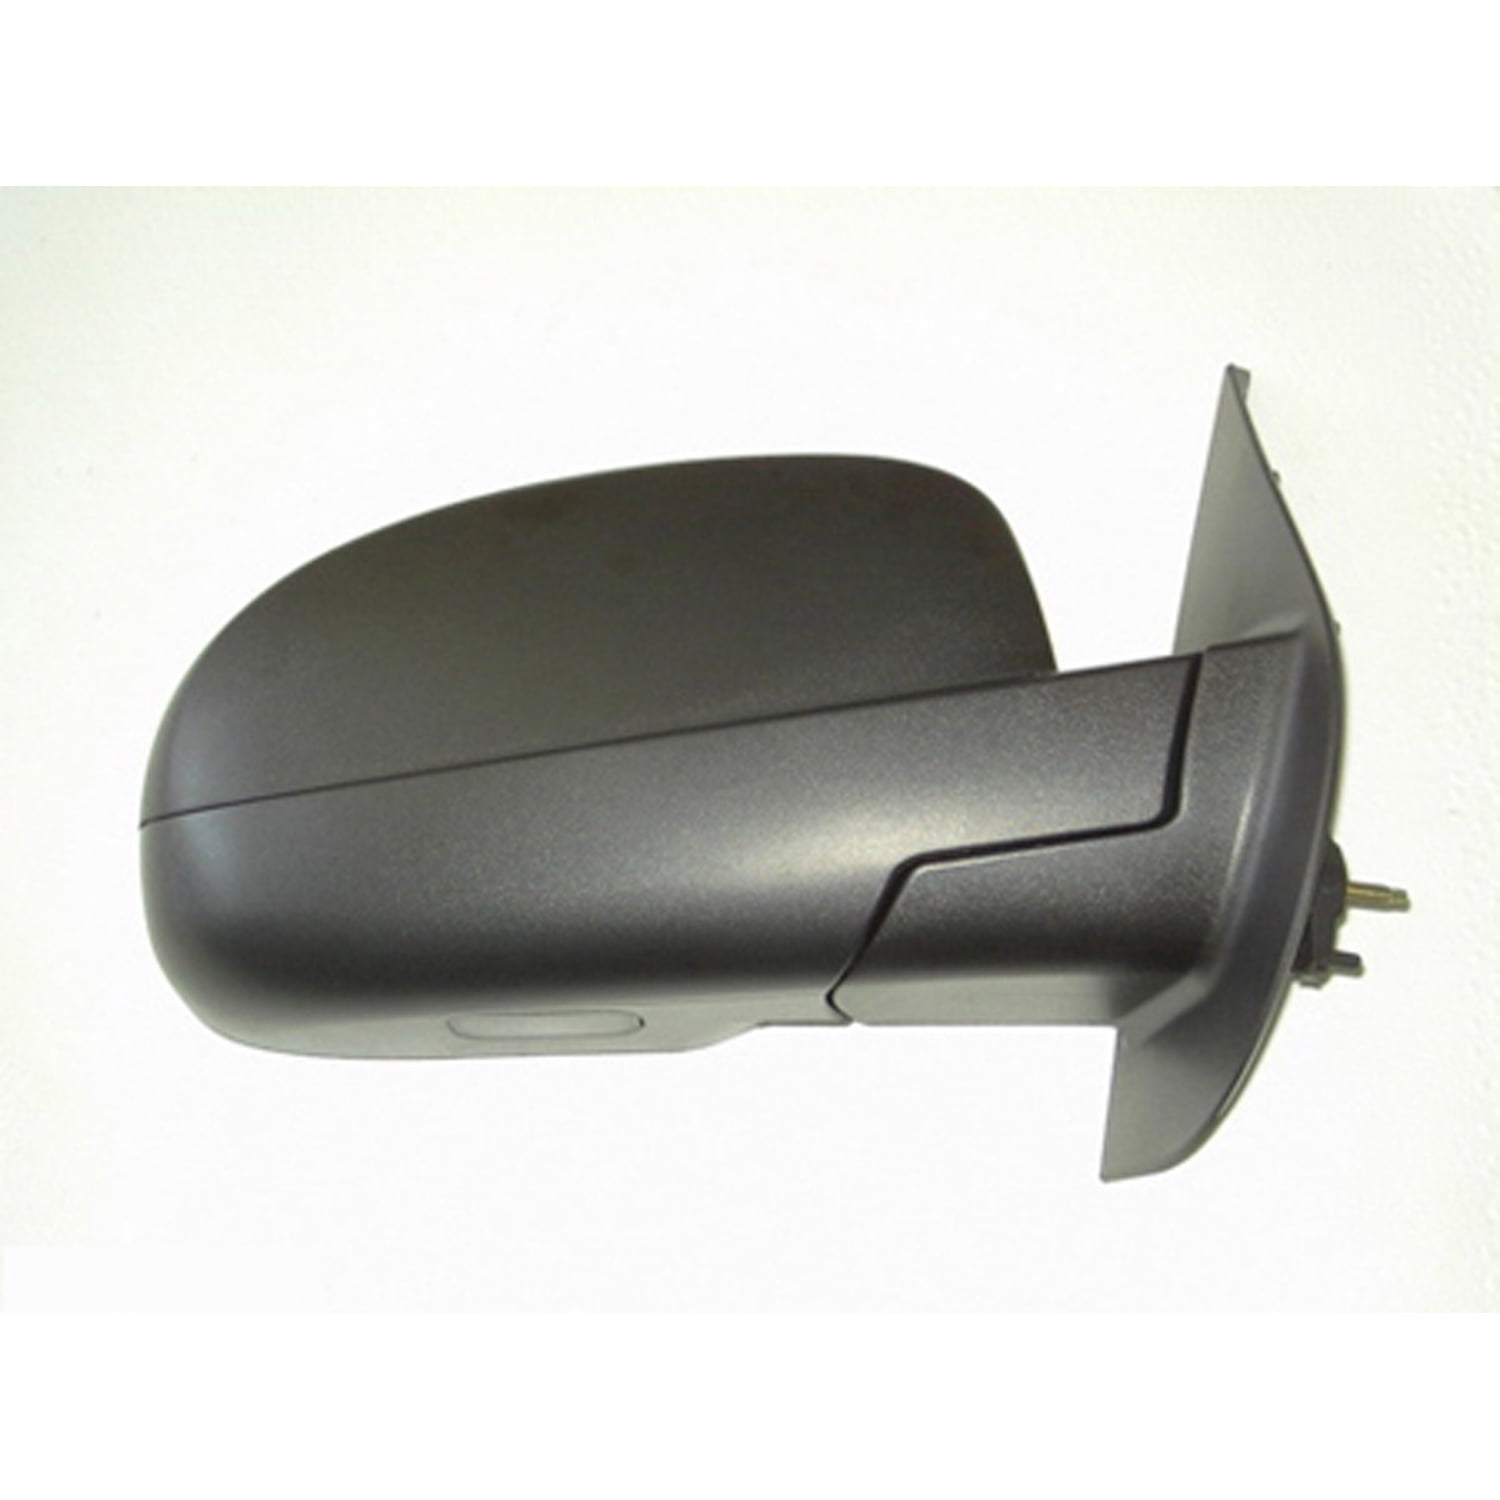 GM1321332 Make Auto Parts Manufacturing Passenger Right Side Manual Operated Mirror Textured Black For GMC Sierra 1500 2007 2008 2009 2010 2011 2012 2013 